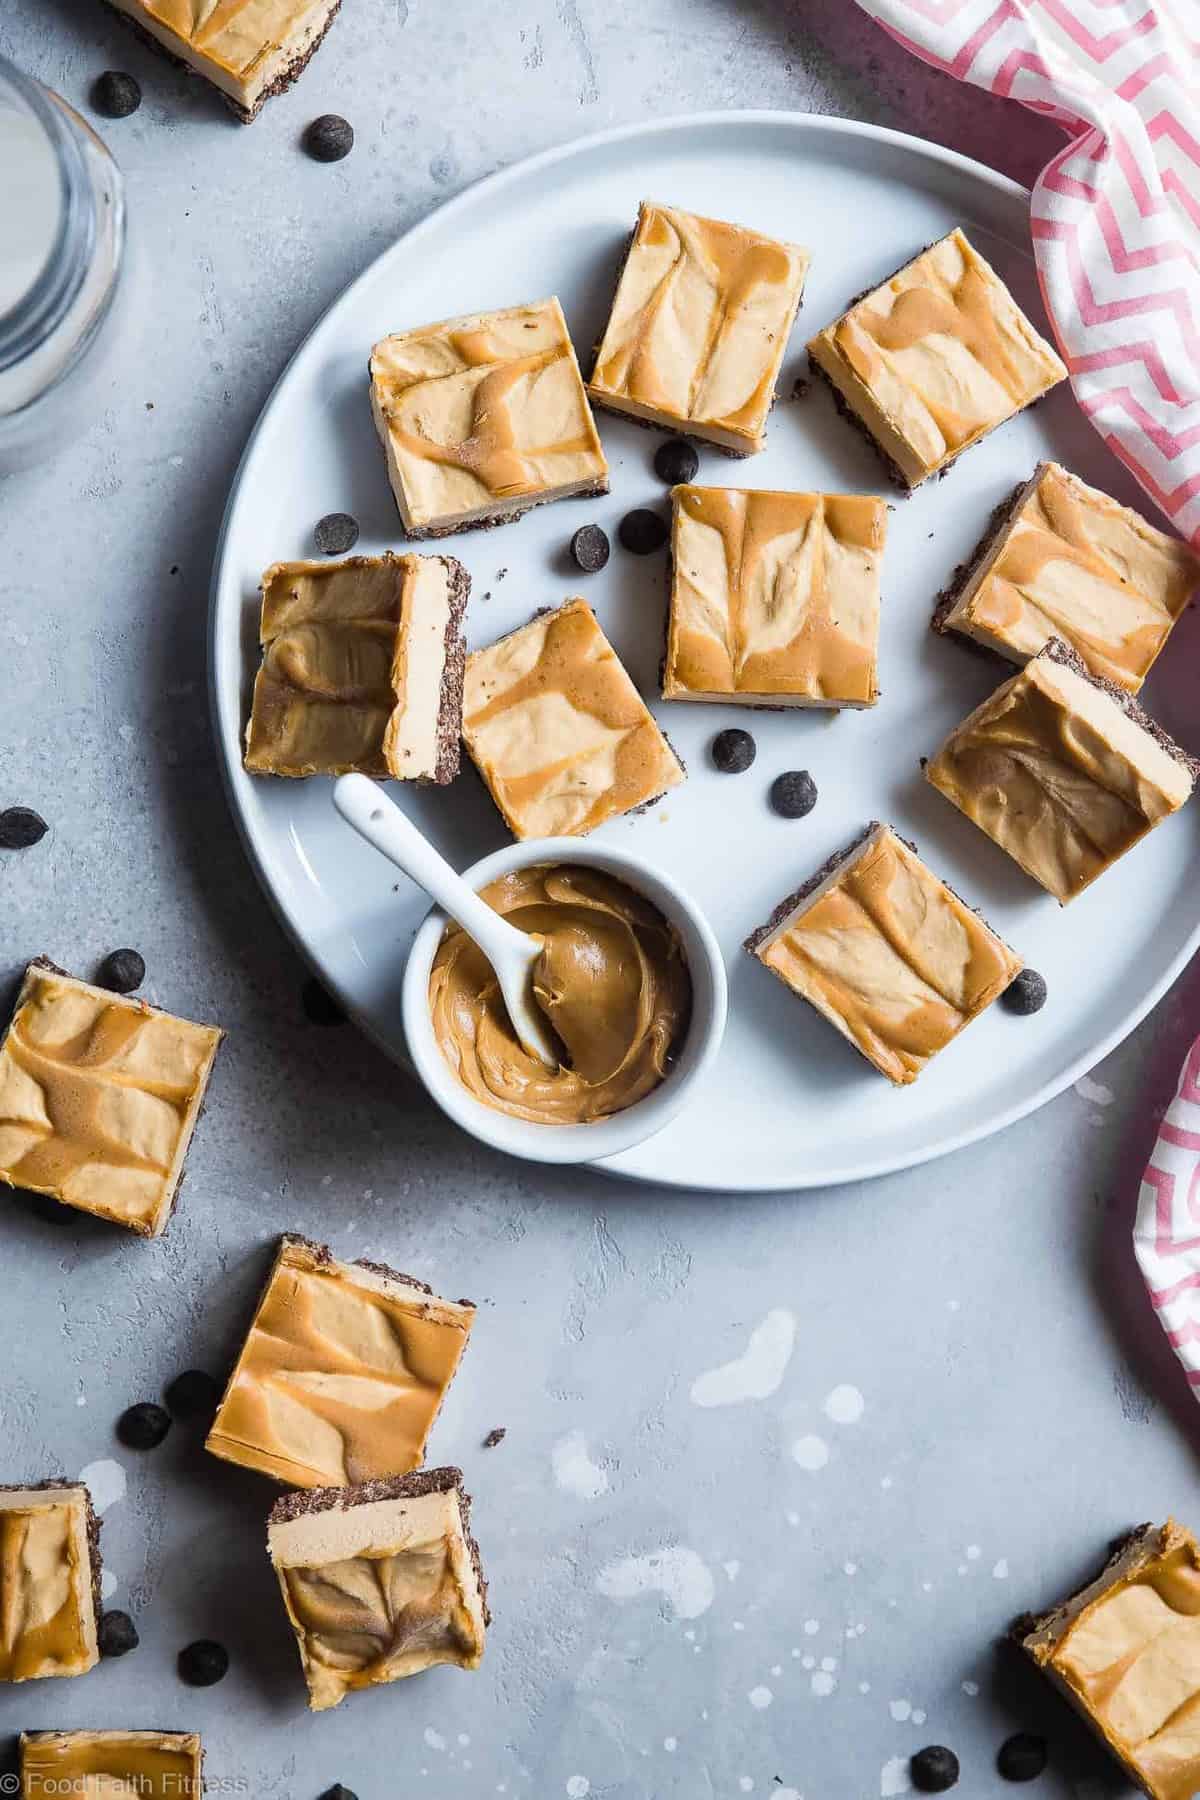 Dairy and Gluten Free No Bake Peanut Butter Cheesecake Bars - A super easy dessert with a yummy, crunchy chocolate rice krispie crust. You'd never know that they are gluten free, dairy free and made with better for you ingredients! | #Foodfaithfitness | #GlutenFree #DairyFree #Healthy #Peanutbutter #NoBake